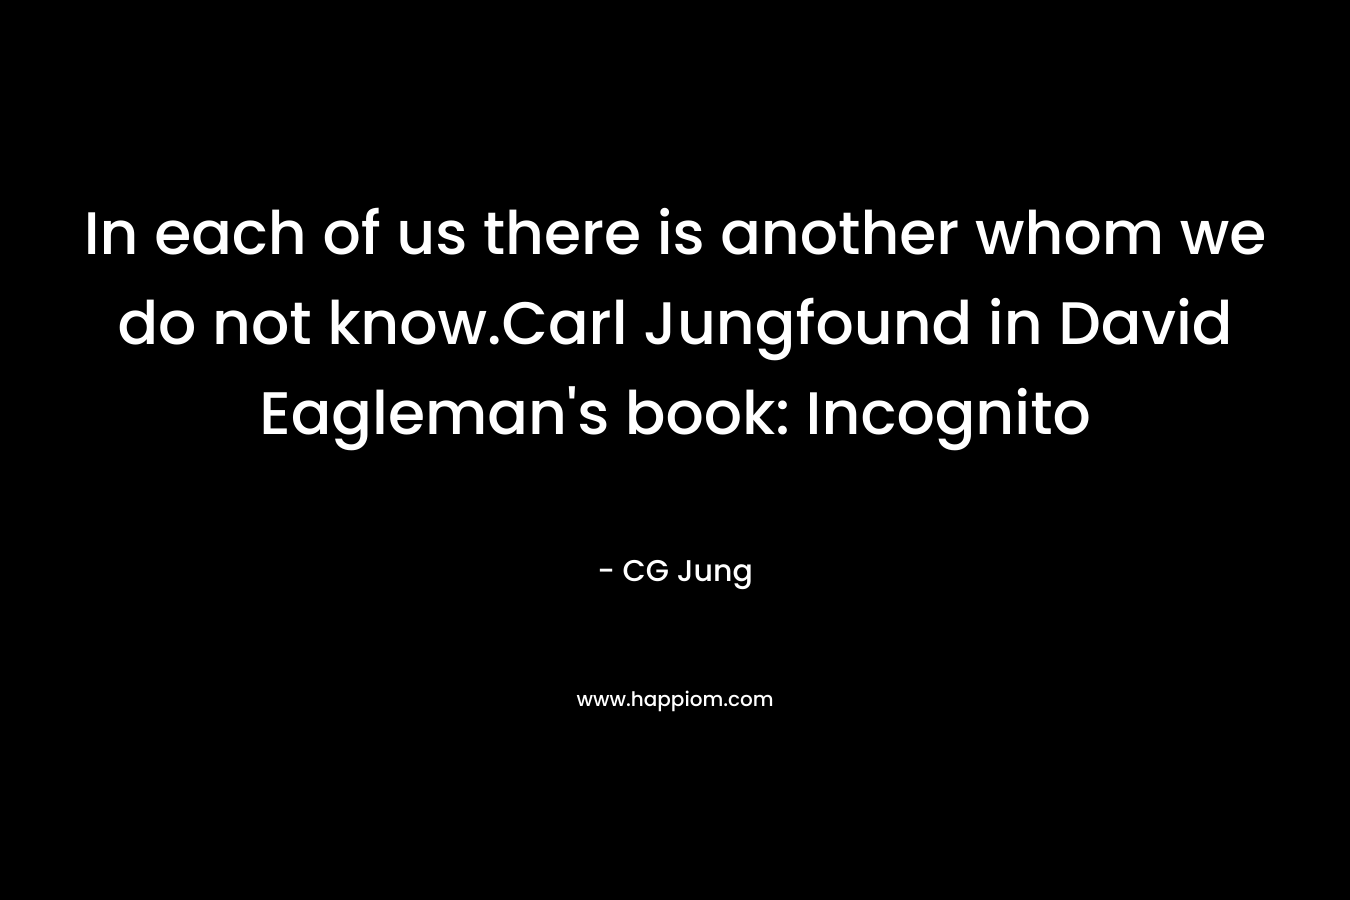 In each of us there is another whom we do not know.Carl Jungfound in David Eagleman's book: Incognito